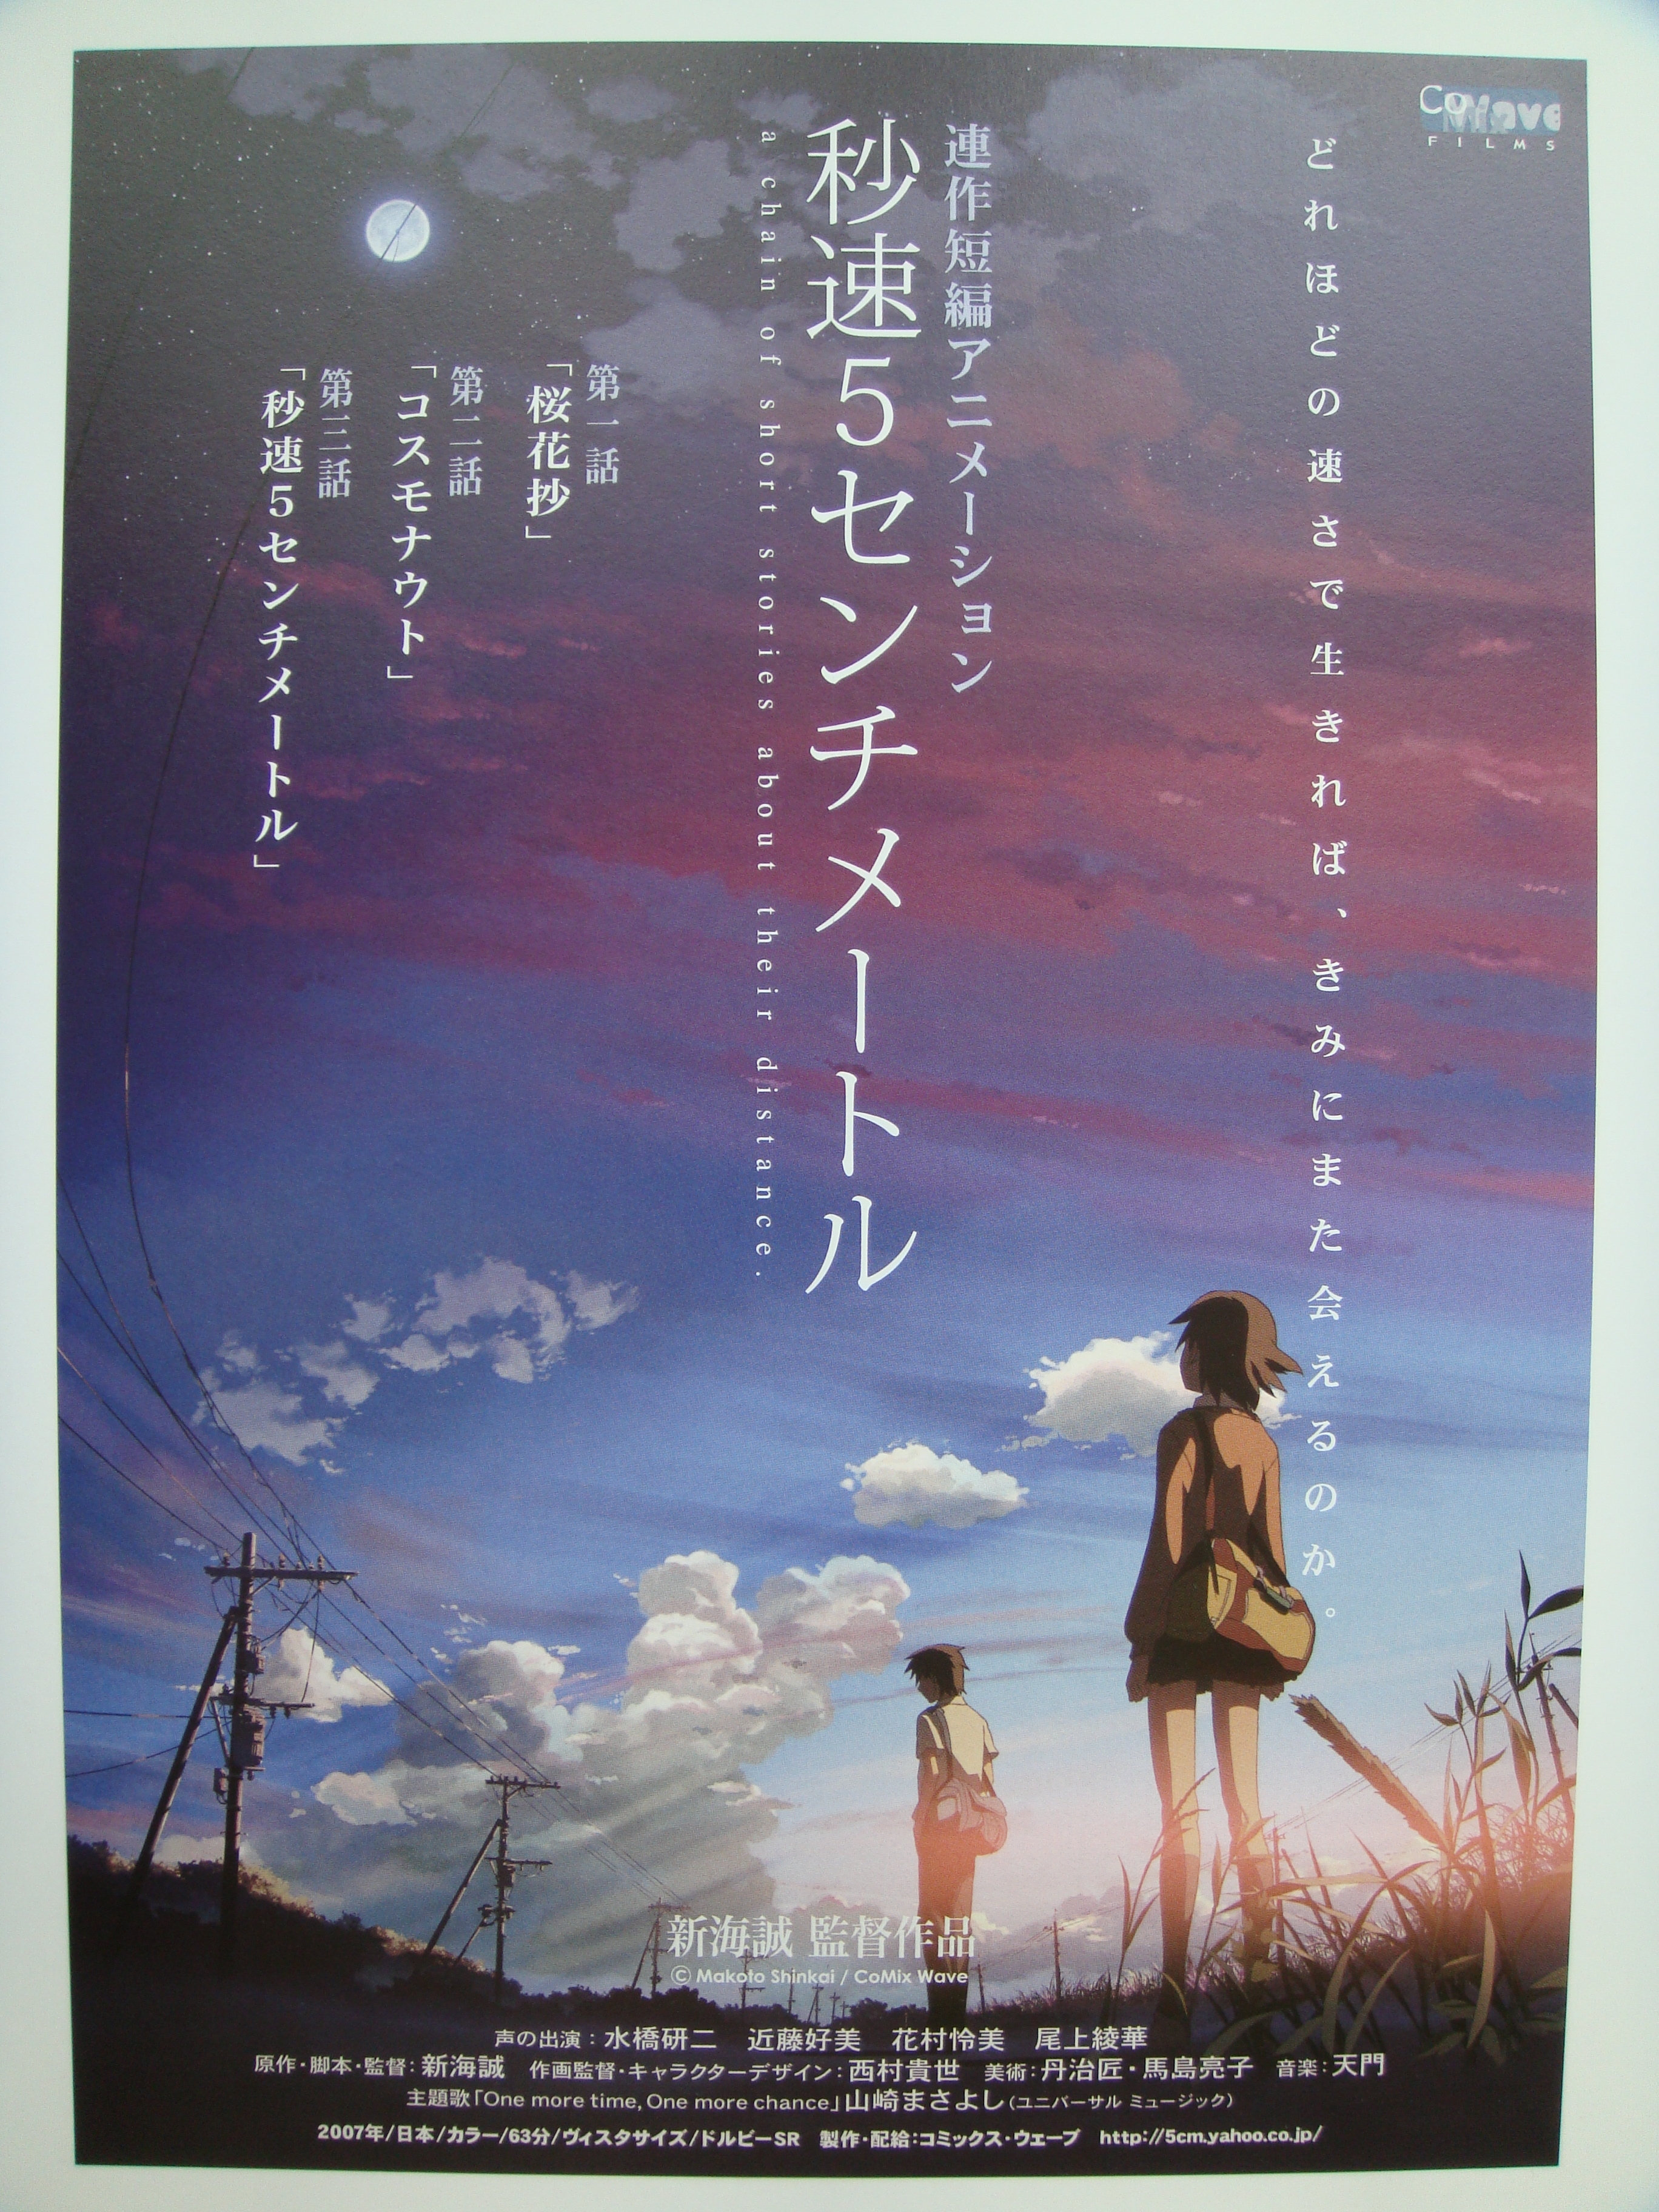 10 New 5 Centimeters Per Second Poster FULL HD 1080p For ...